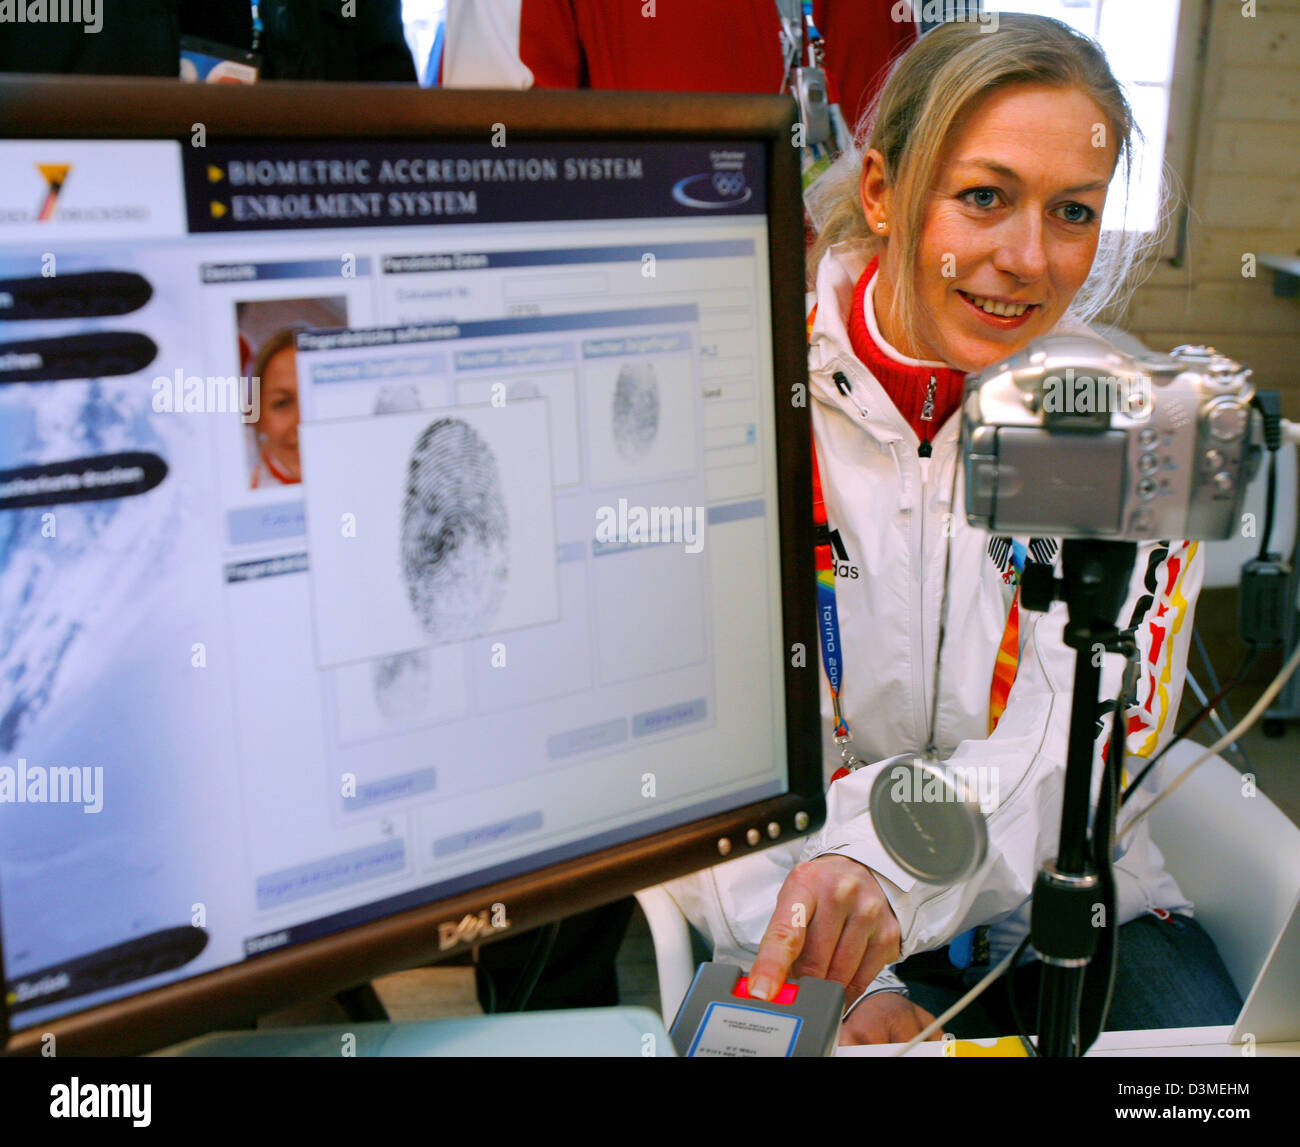 Biometric data of German luger Sylke Otto, Slat Lake City 2002 Olympic champion, is saved during the accreditation for the German house at the Olympic Village in Sestrieres, Italy, Thursday 09 February 2006. Afterwards Otto answered journalist's questions during a press conference. The grand opening of the XX Olympic Winter Games in Turin takes place on Friday, 10 February 2006. Ph Stock Photo